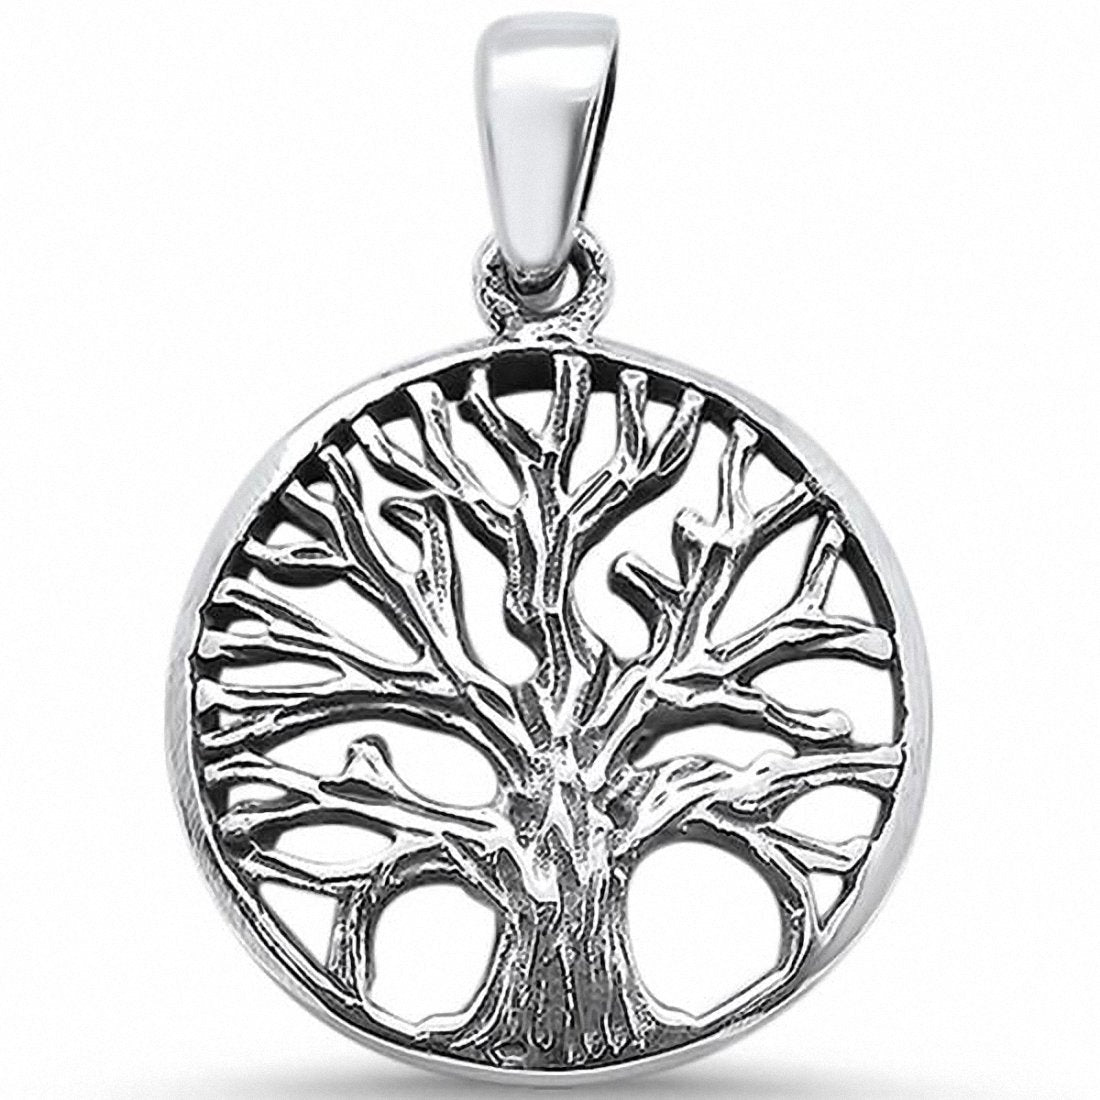 Round Plain Tree of Life Pendant Charm 925 Sterling Silver